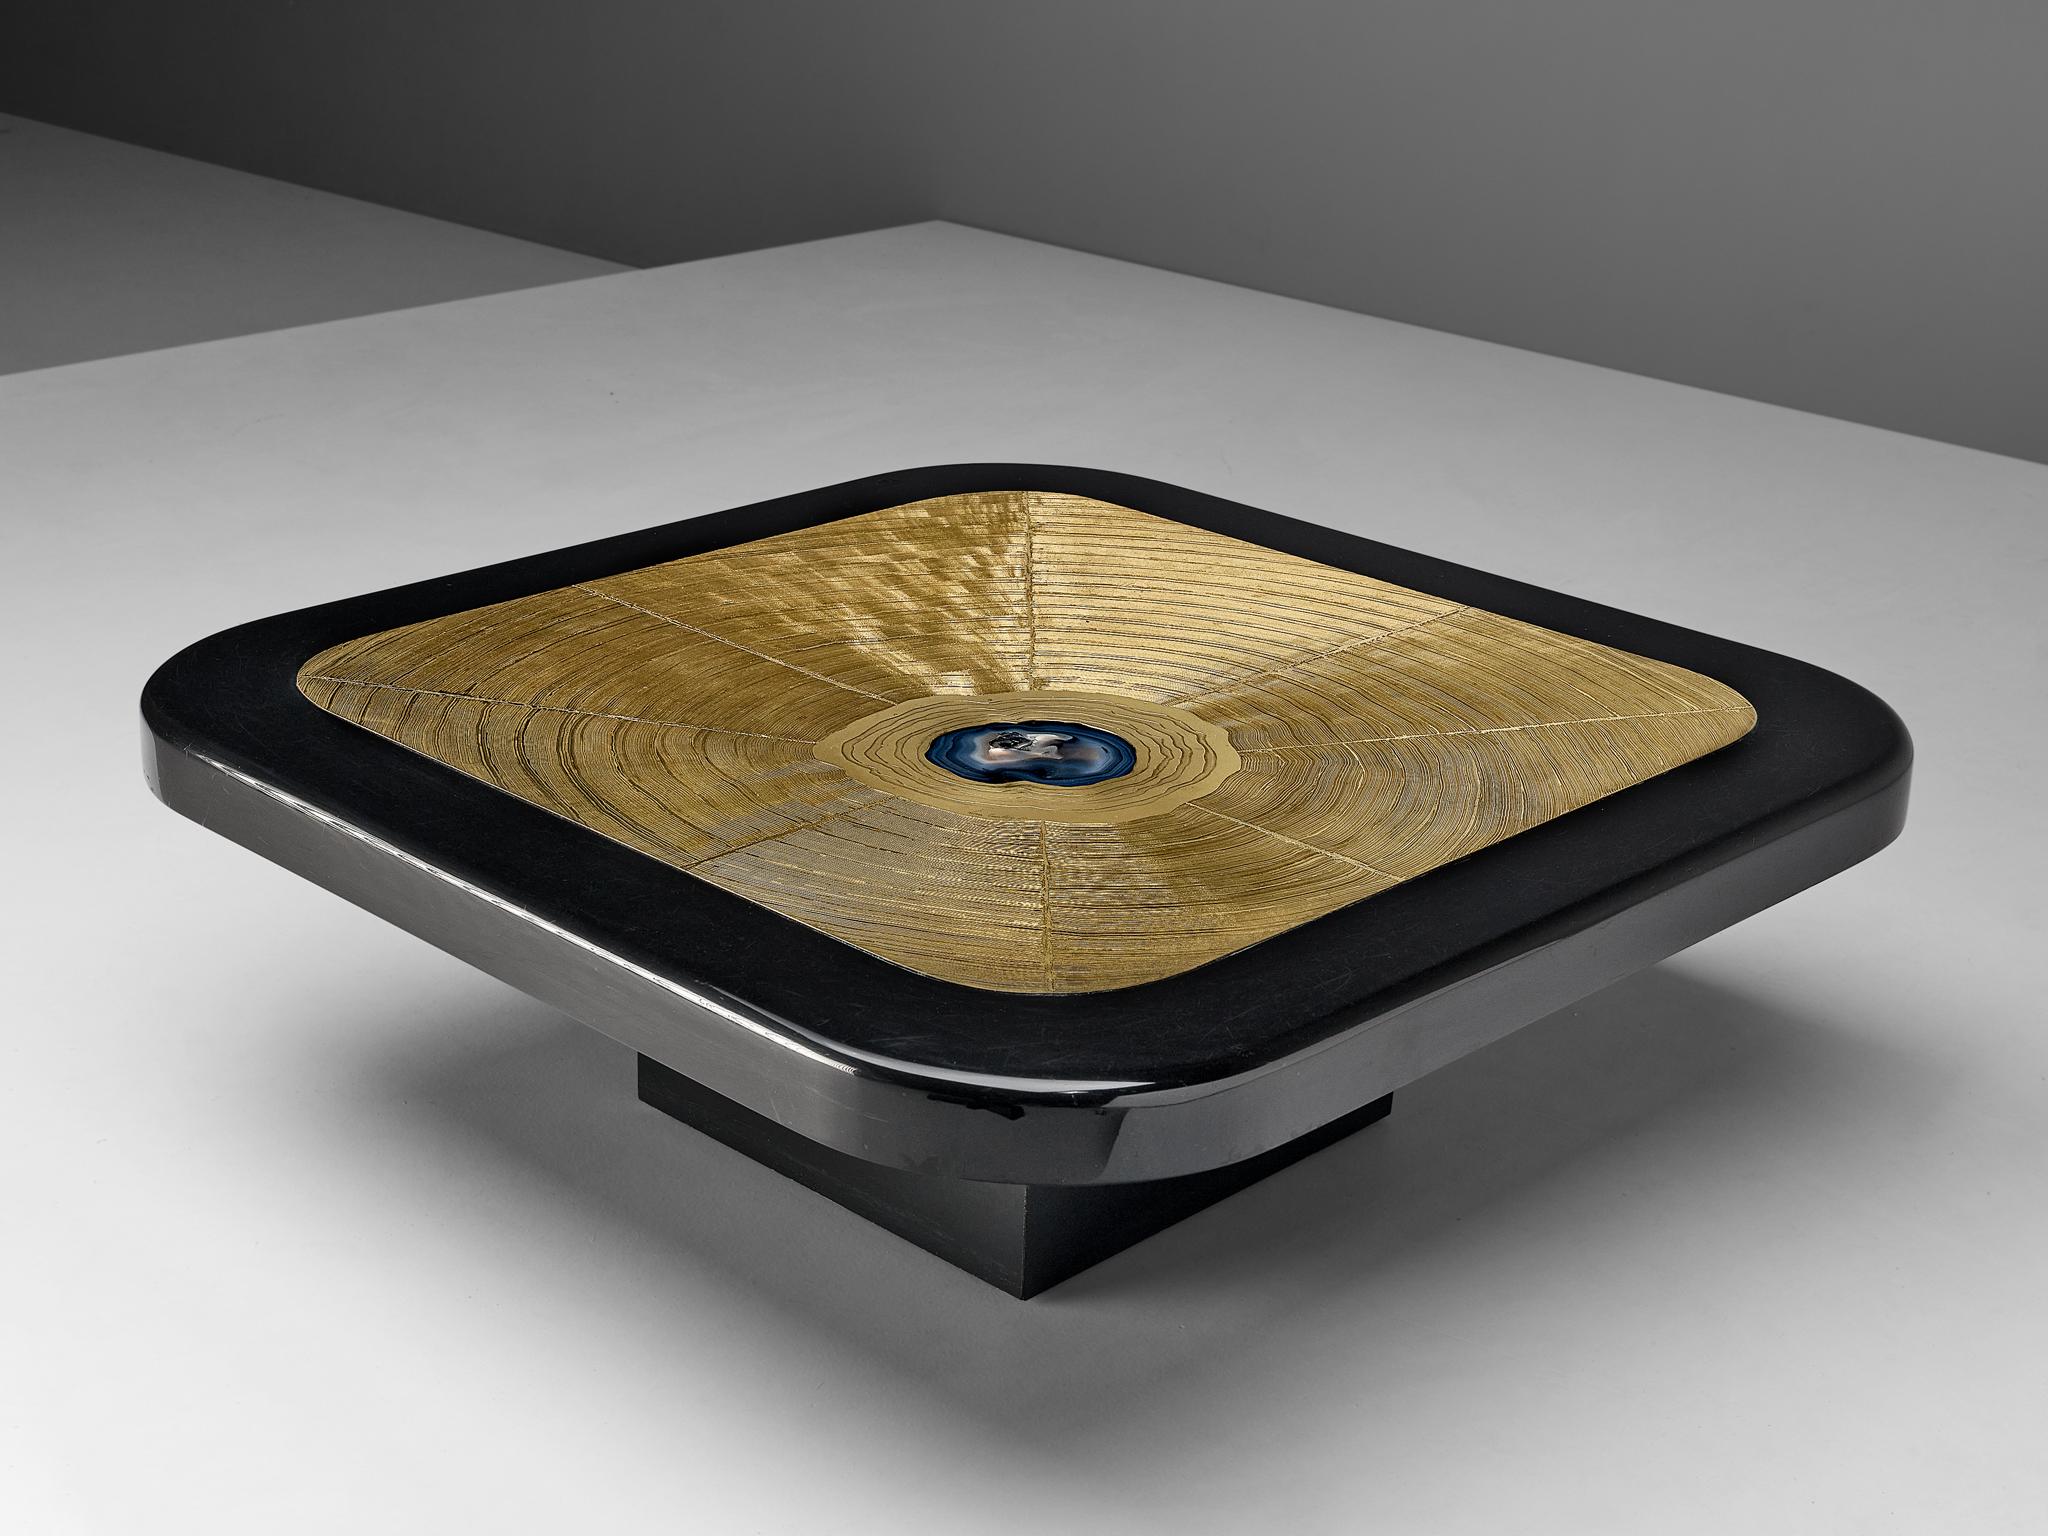 Lova Creation, coffee table, brass, metal, wood, agate, Belgium, 1987

This luxurious side table by Lova Creation is a dazzling eyecatcher. The golden square tabletop is signed and shows a pattern of large abstract brush strokes. The center is